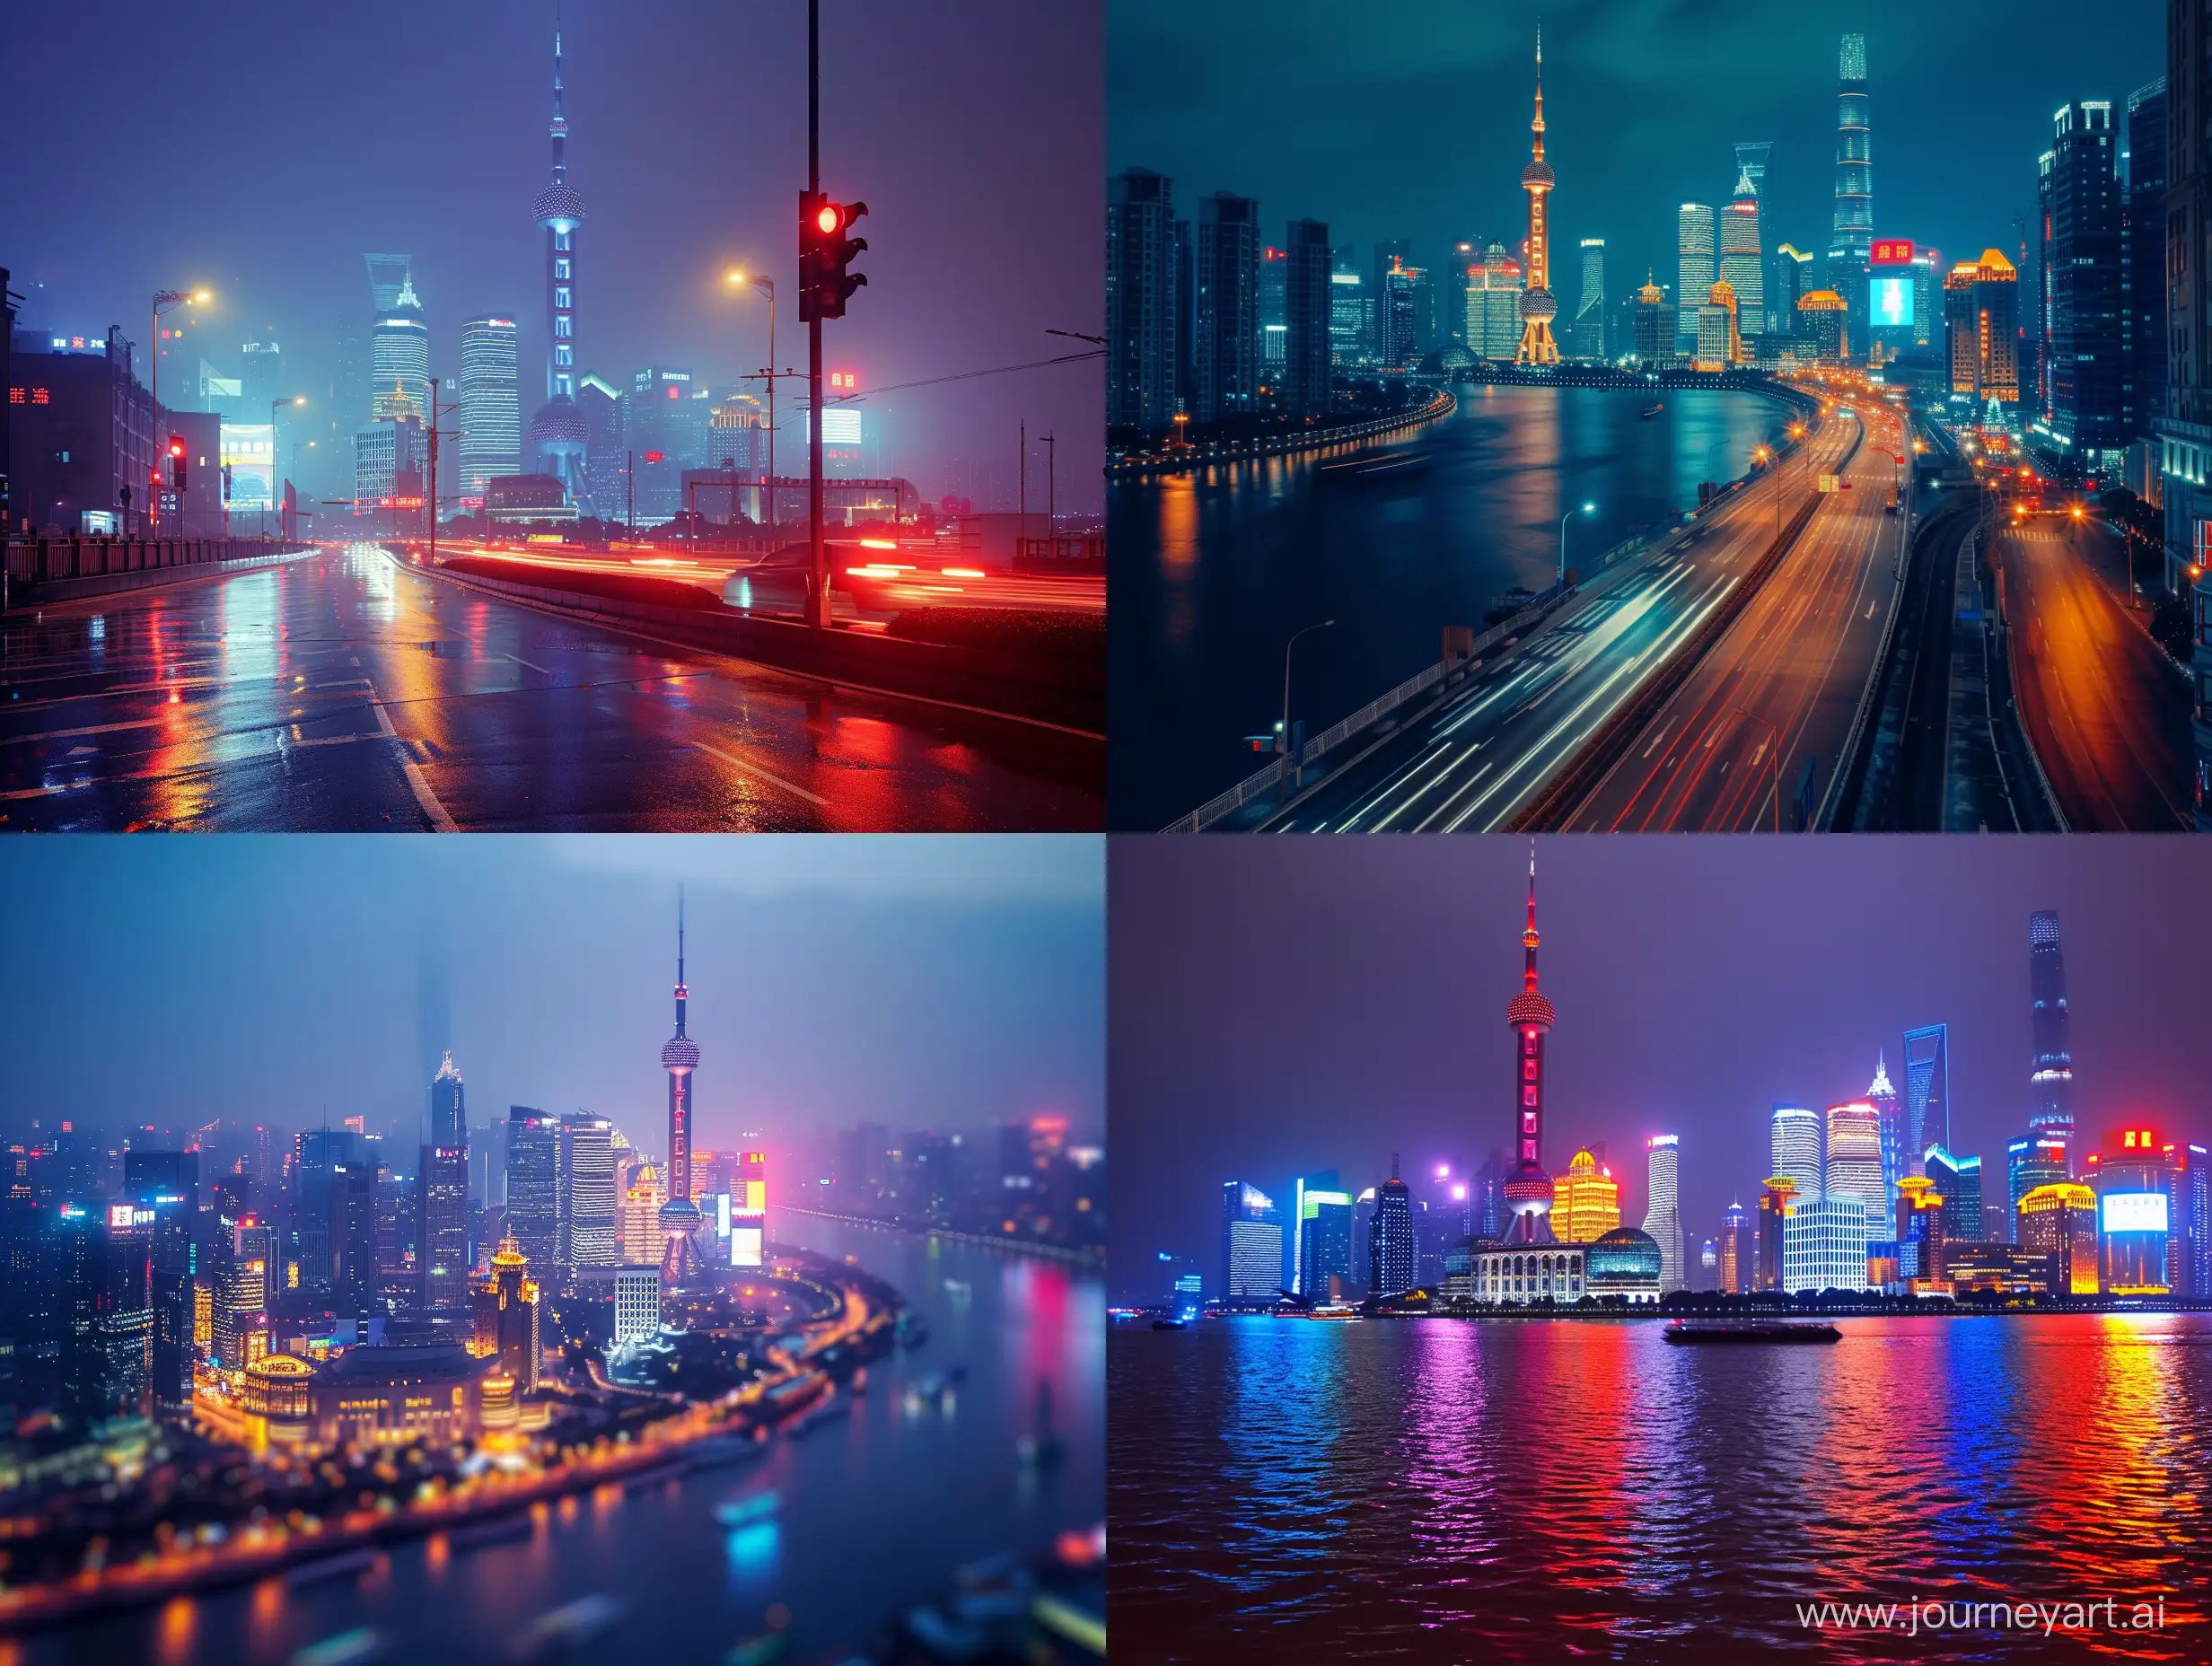 a photo of shanghai, photography, night time, style raw,

